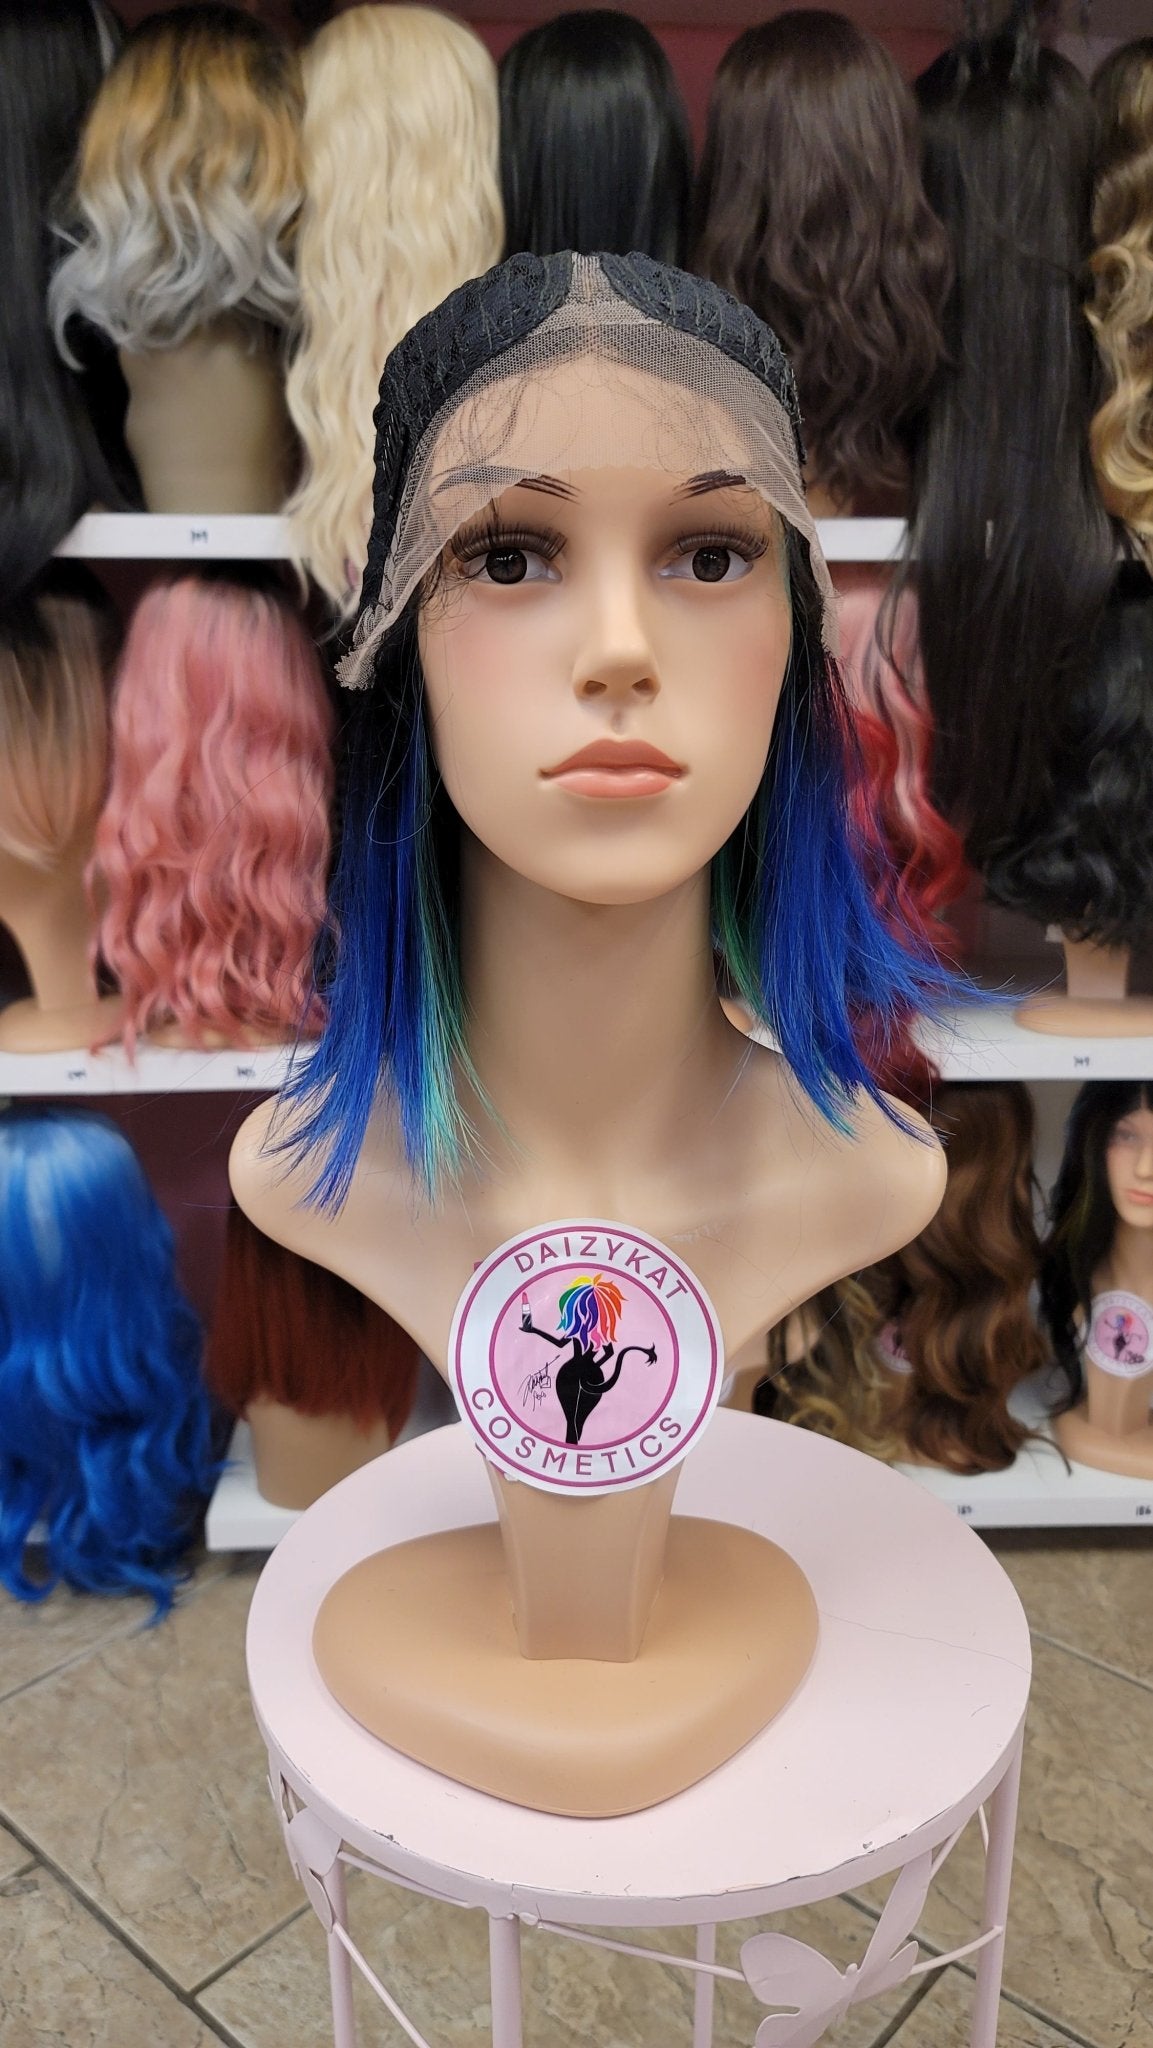 263 CHA CHA - Middle Part Lace Front Wig - 1B/BLU/GRN - DaizyKat Cosmetics 263 CHA CHA - Middle Part Lace Front Wig - 1B/BLU/GRN DaizyKat Cosmetics Wigs